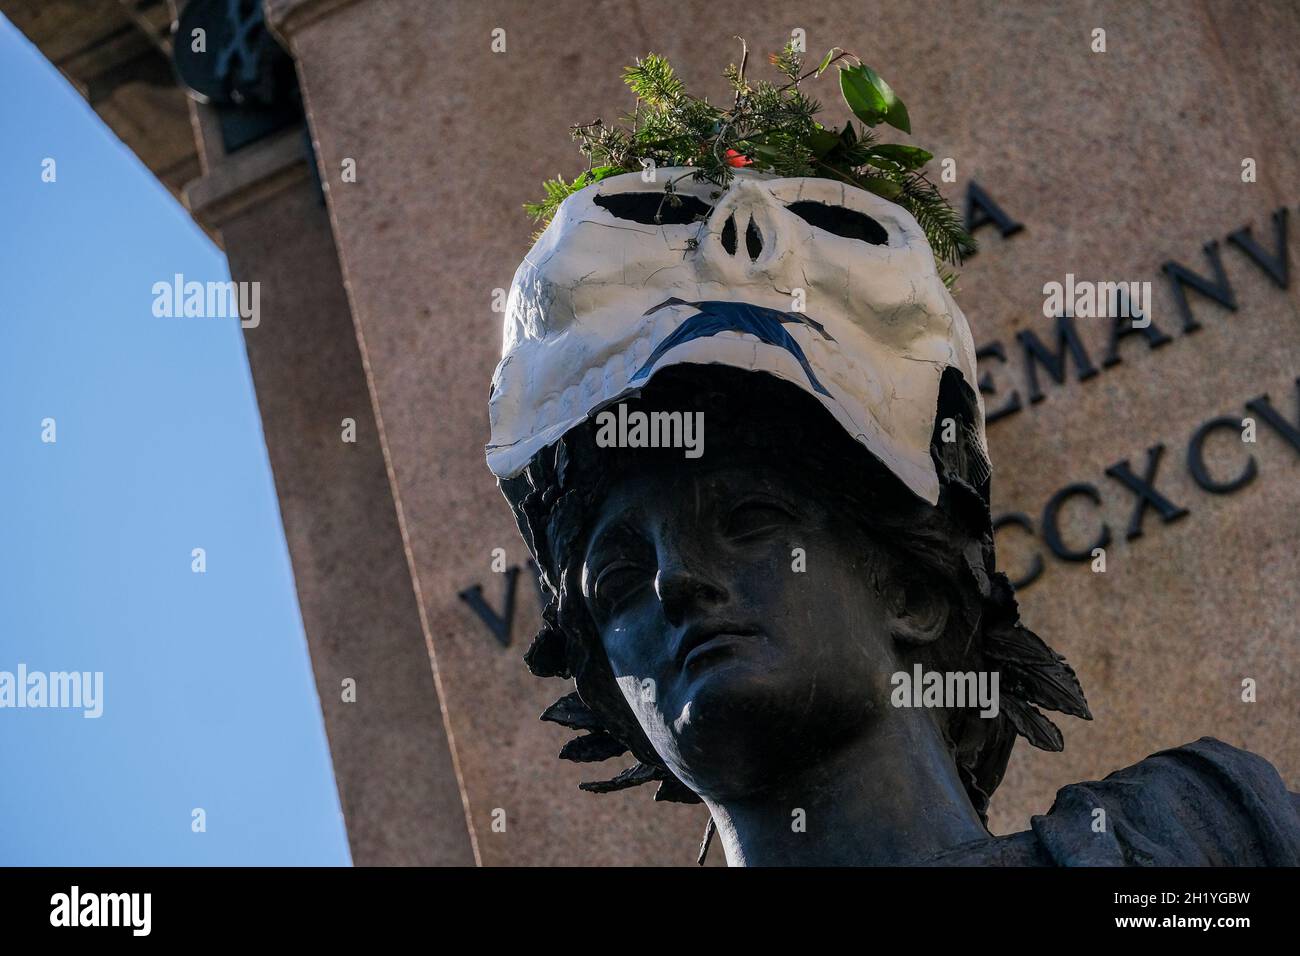 Environmentalist protest in the squares of many Italian cities.The blitz was carried out by members of Extintion Ribellion, during the night, they targeted the statues of the major Italian cities masks depicting a papier-mâché skull with a black 'x' covering the mouth were placed on the monuments in naples Stock Photo